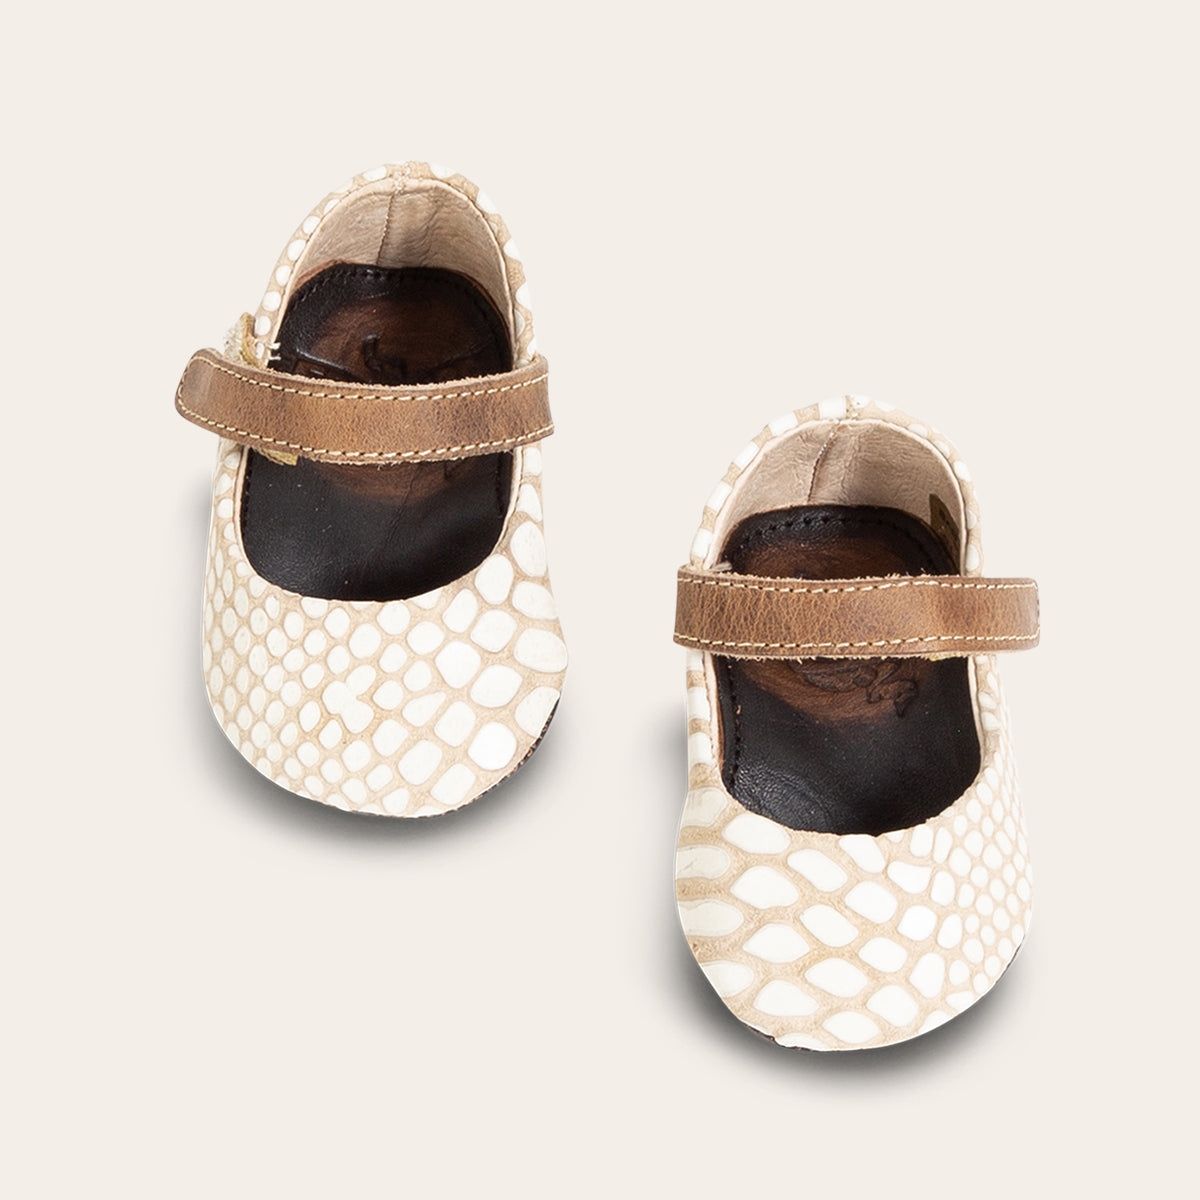 front view showing top leather strap on FREEBIRD infant baby Jane white snake leather shoe